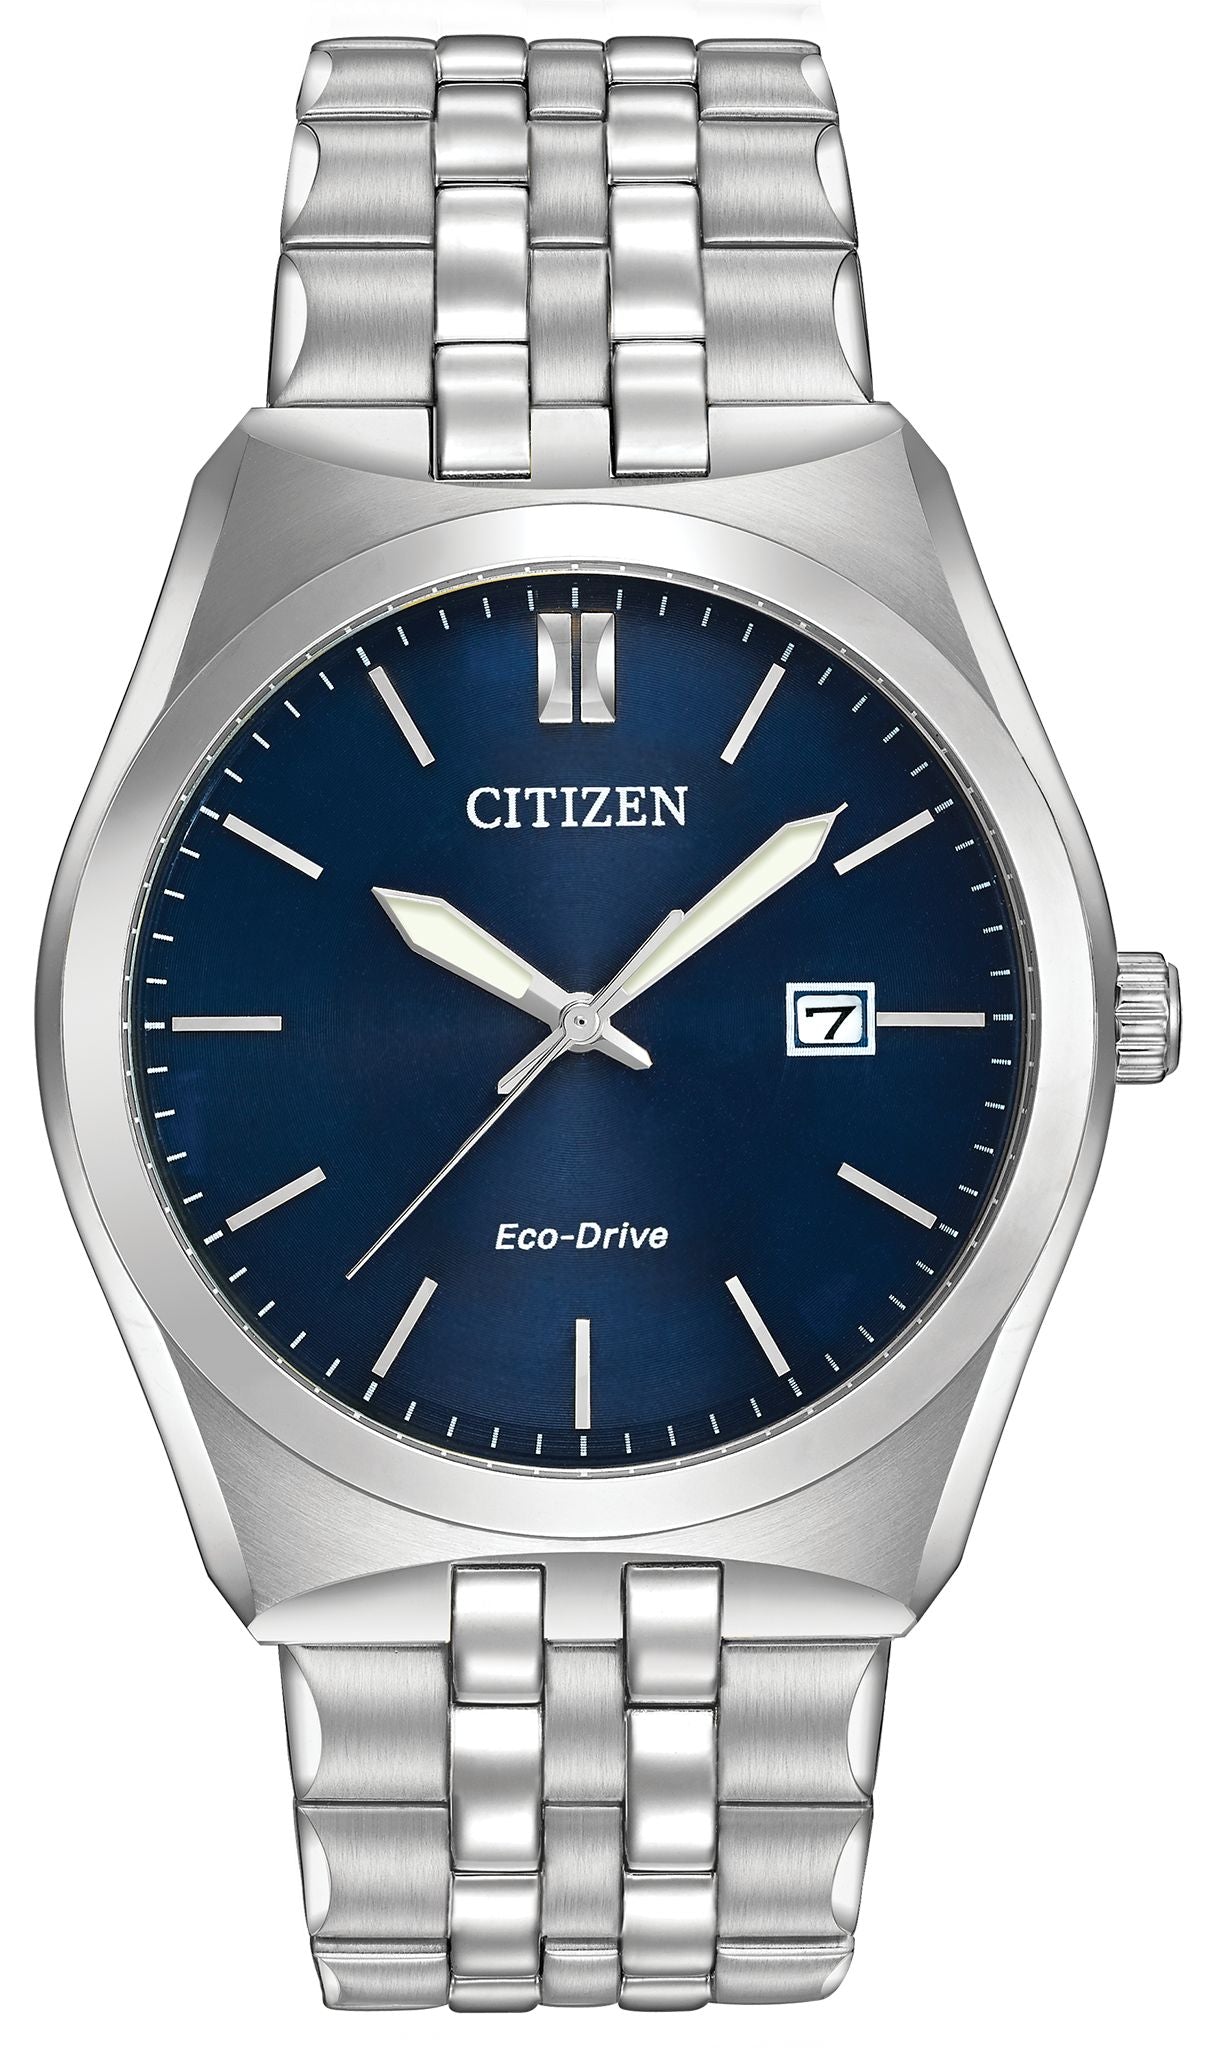 Handsome Men's Stainless Steel Citizen Watch with Blue Face